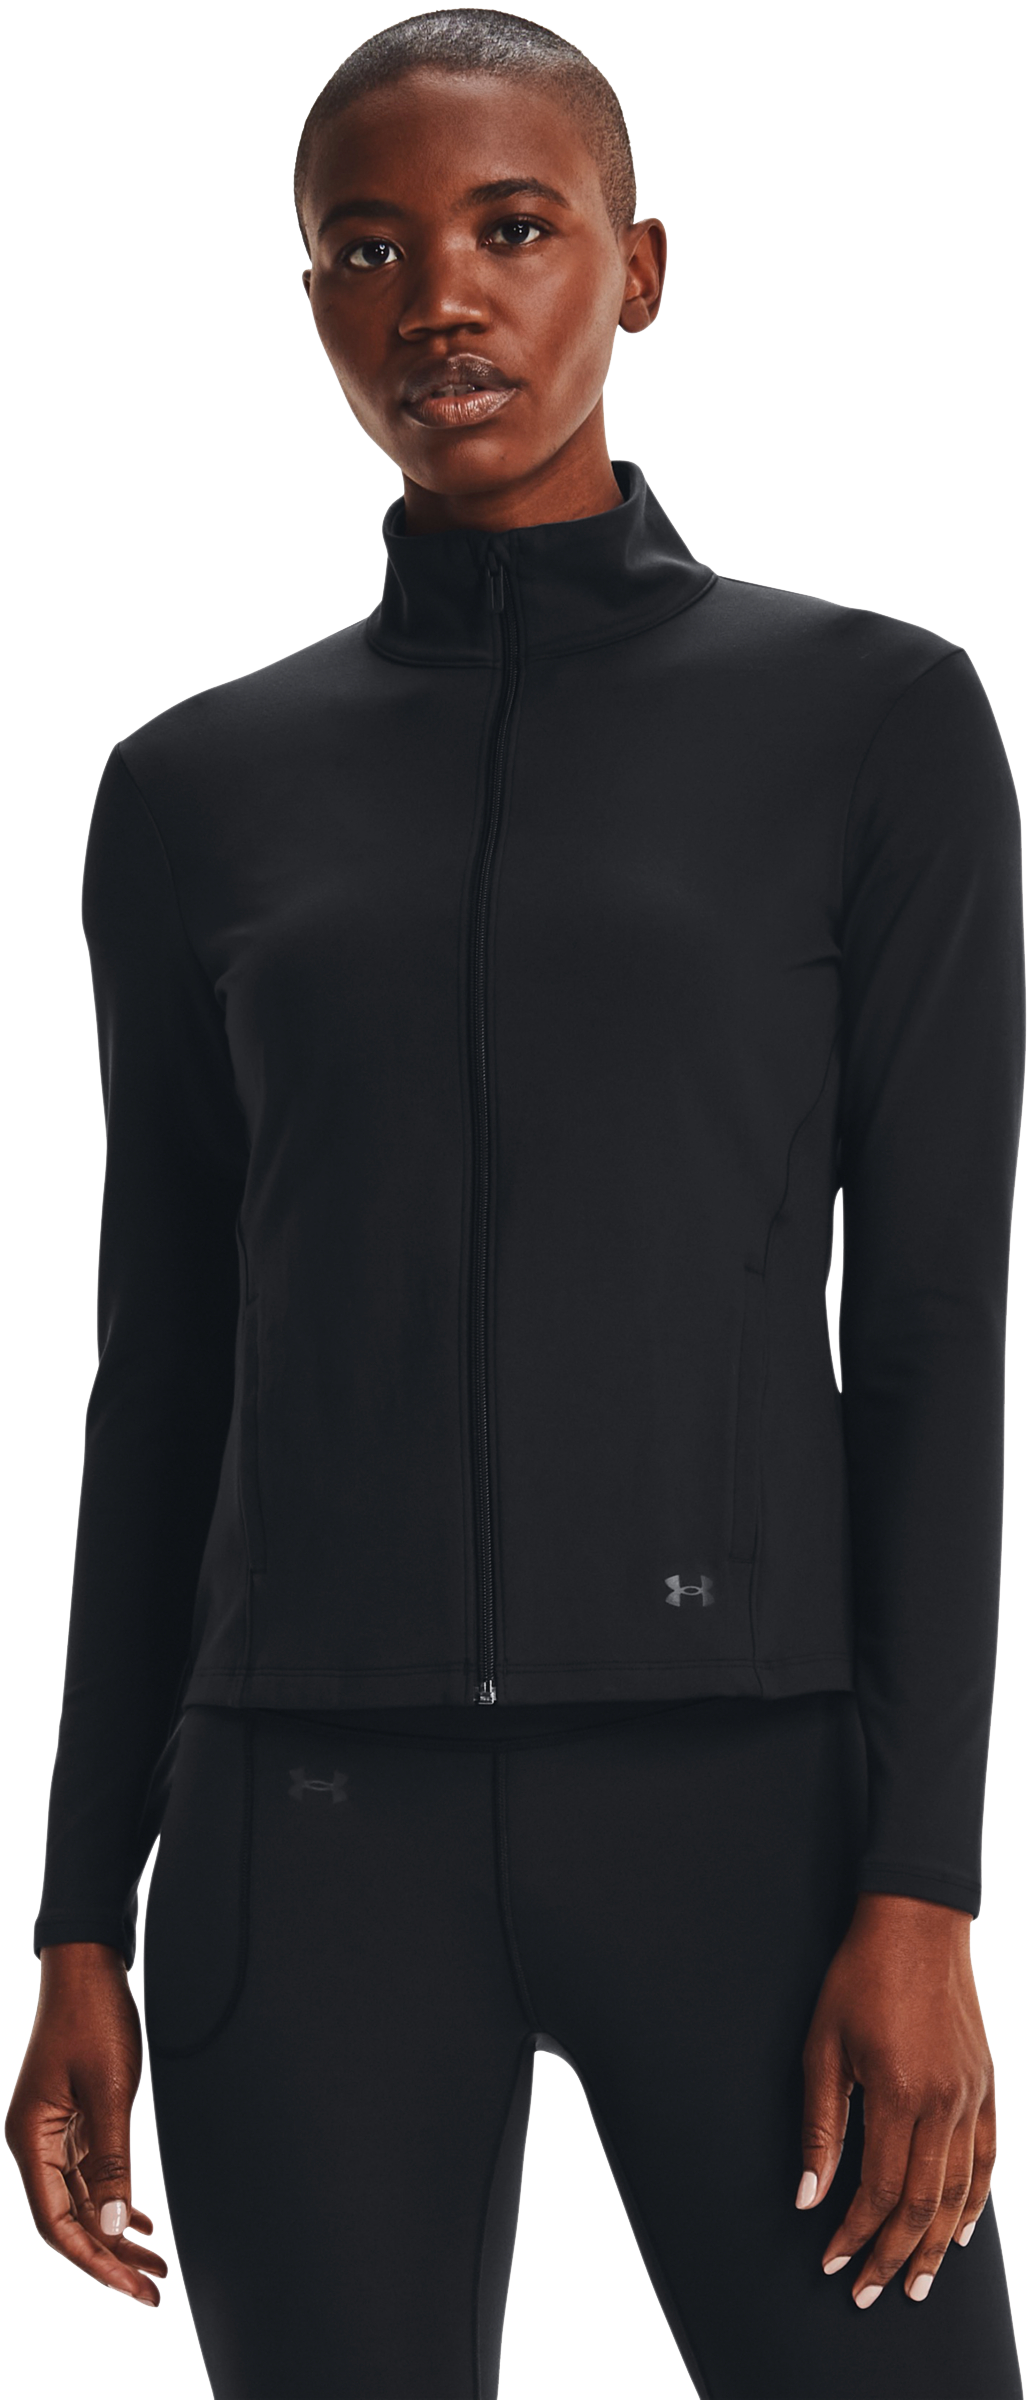 Under Armour Women's Motion Jacket - My Cooling Store